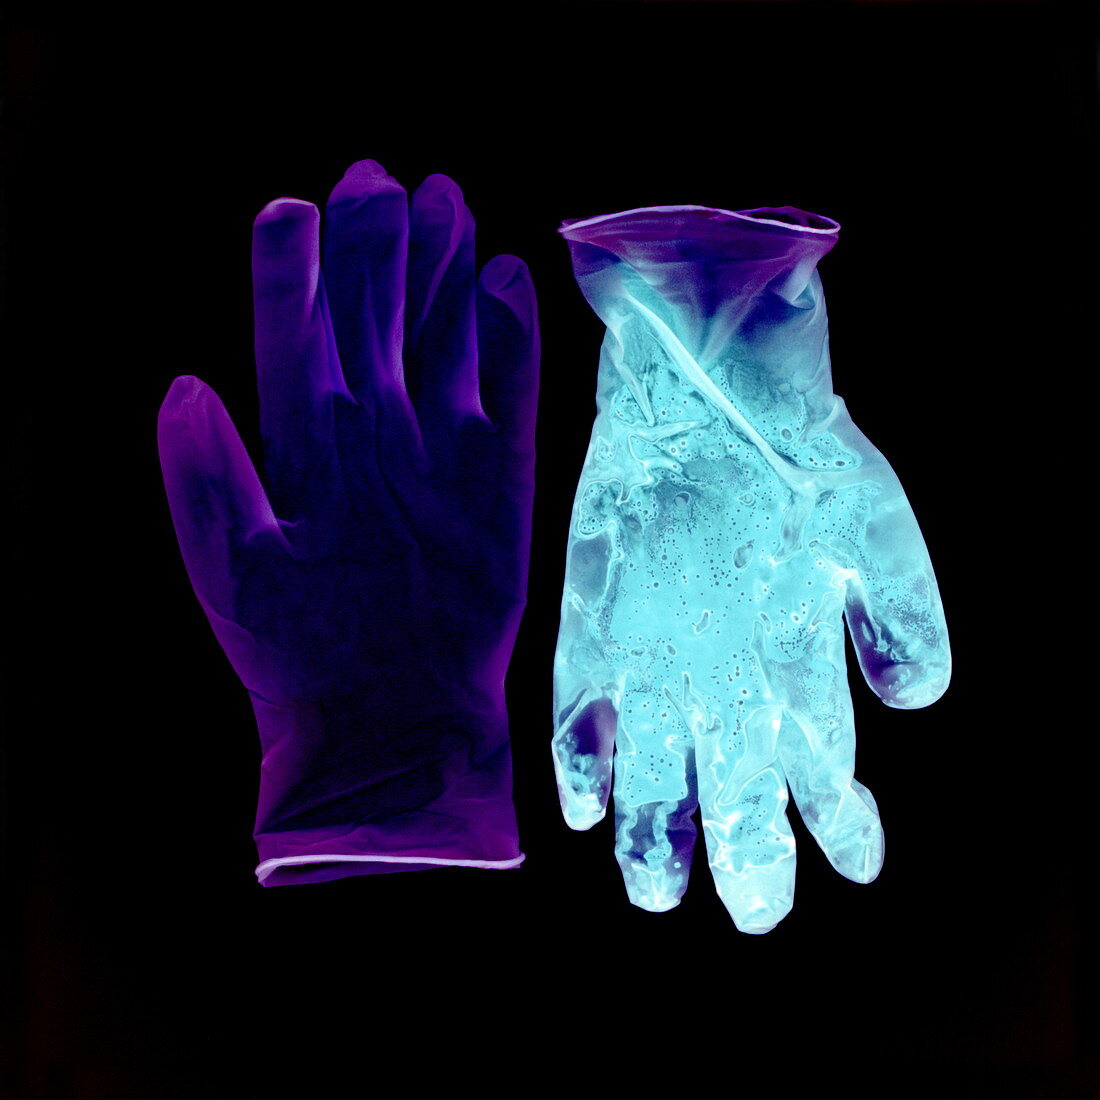 Gloves pre- and post-op,negative image